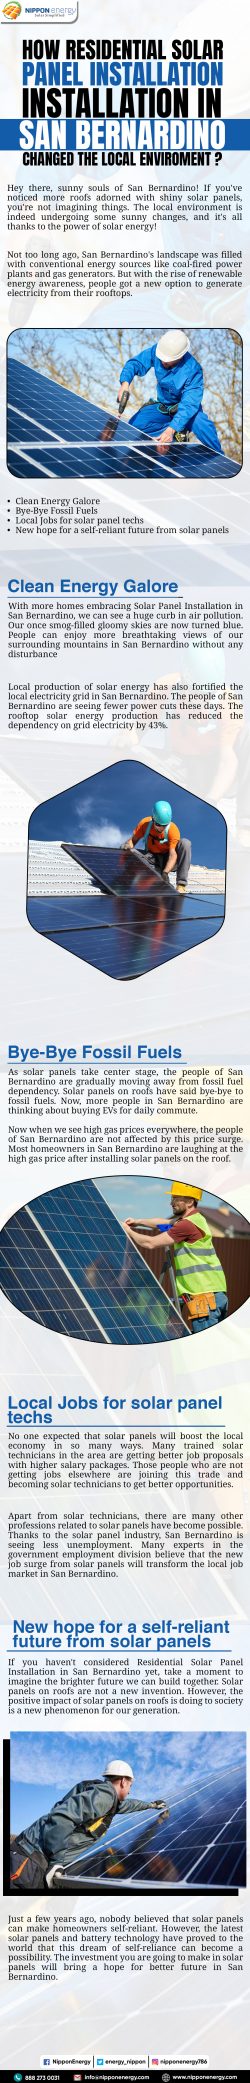 How Residential Solar Panel Installation In San Bernardino Changed The Local Environment?